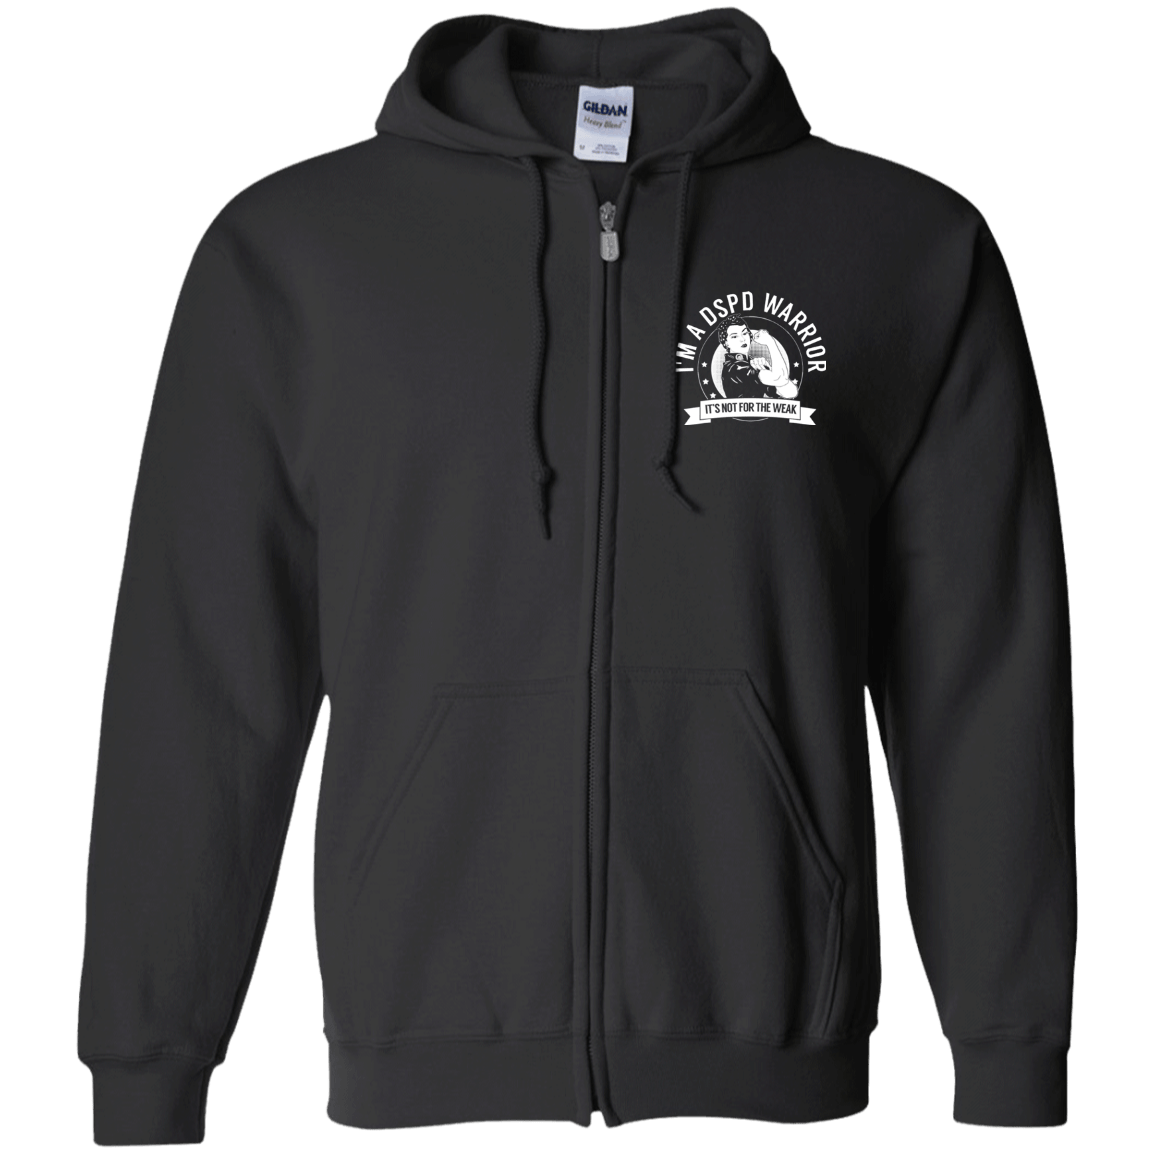 Delayed Sleep Phase Disorder - DSPD Warrior NFTW Zip Up Hooded Sweatshirt - The Unchargeables